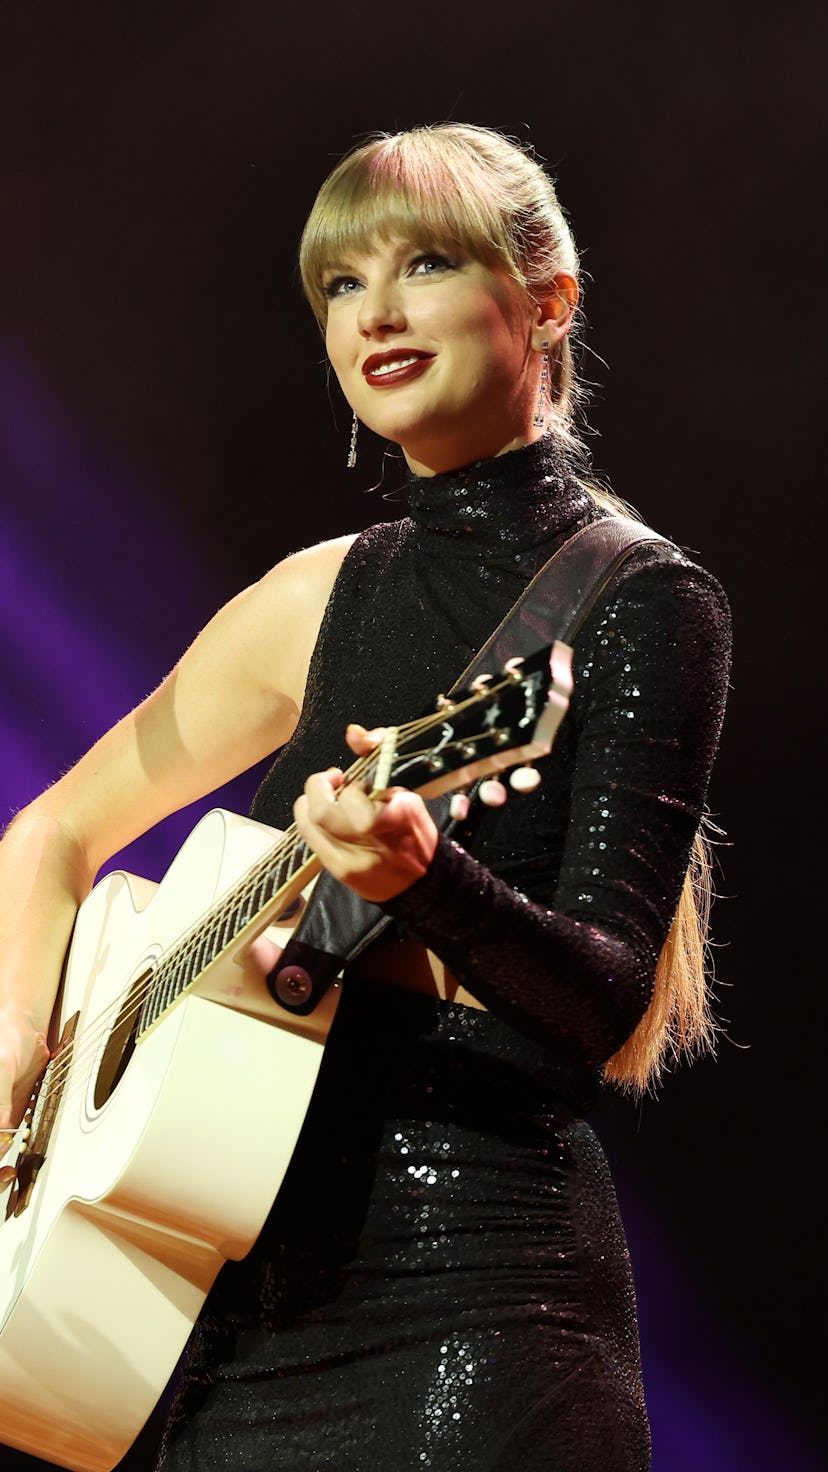 Taylor Swift smiling and holding a guitar live onstage